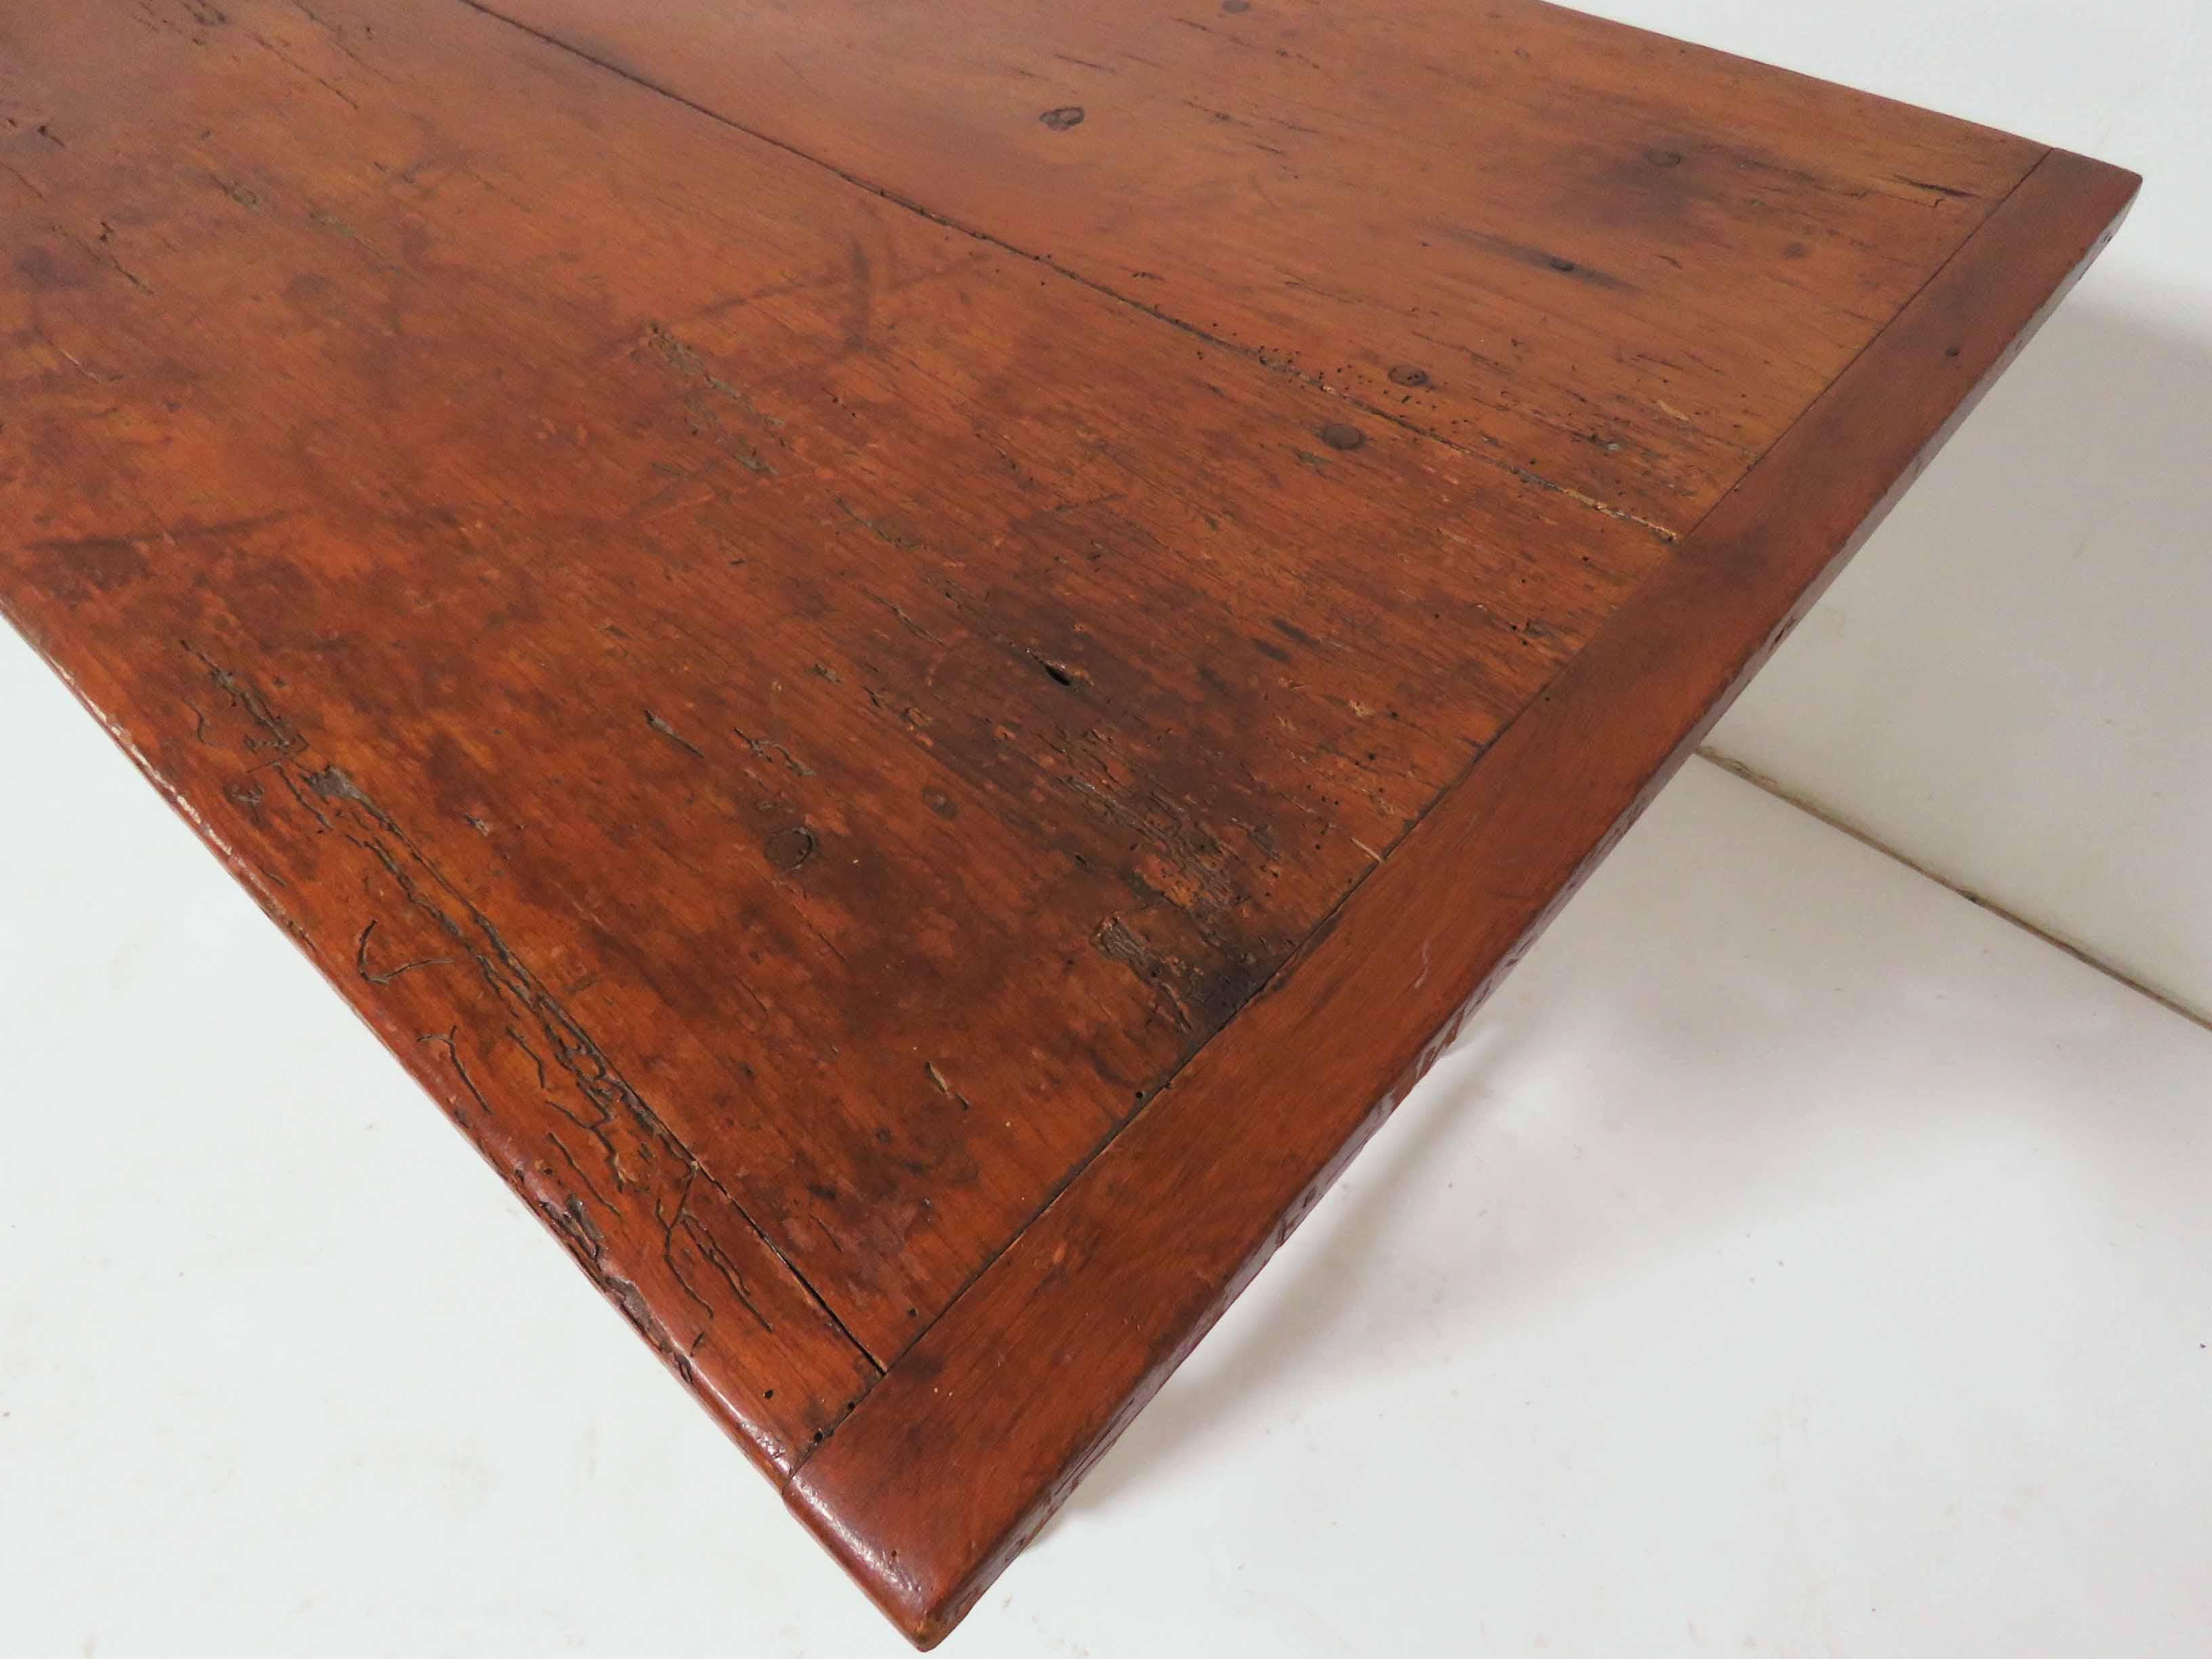 Pine 18th Century Antique American Tavern Table with Breadboard Top